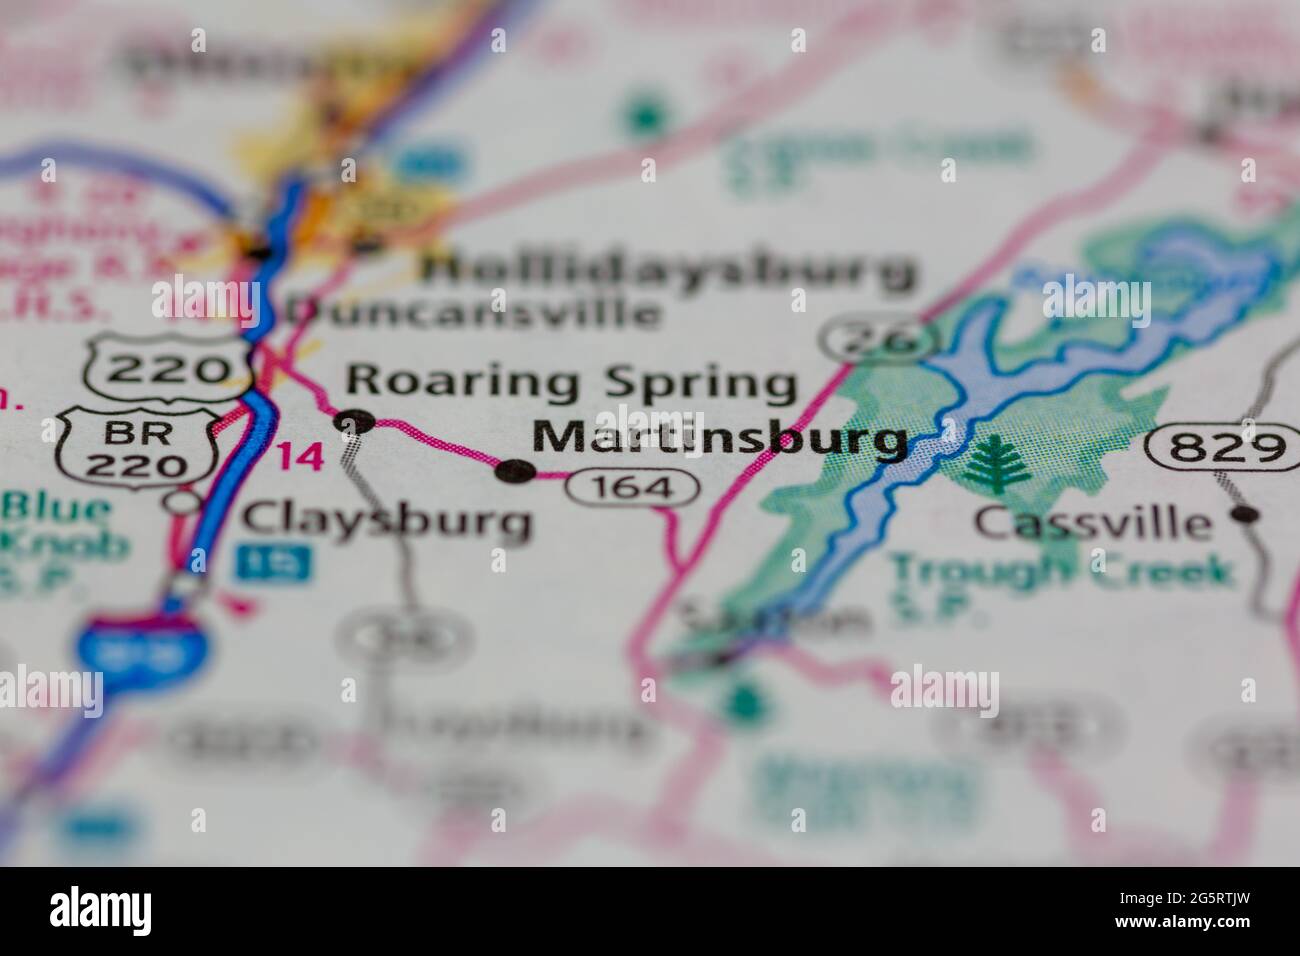 Martinsburg Pennsylvania Usa Shown On A Geography Map Or Road Map 2G5RTJW 